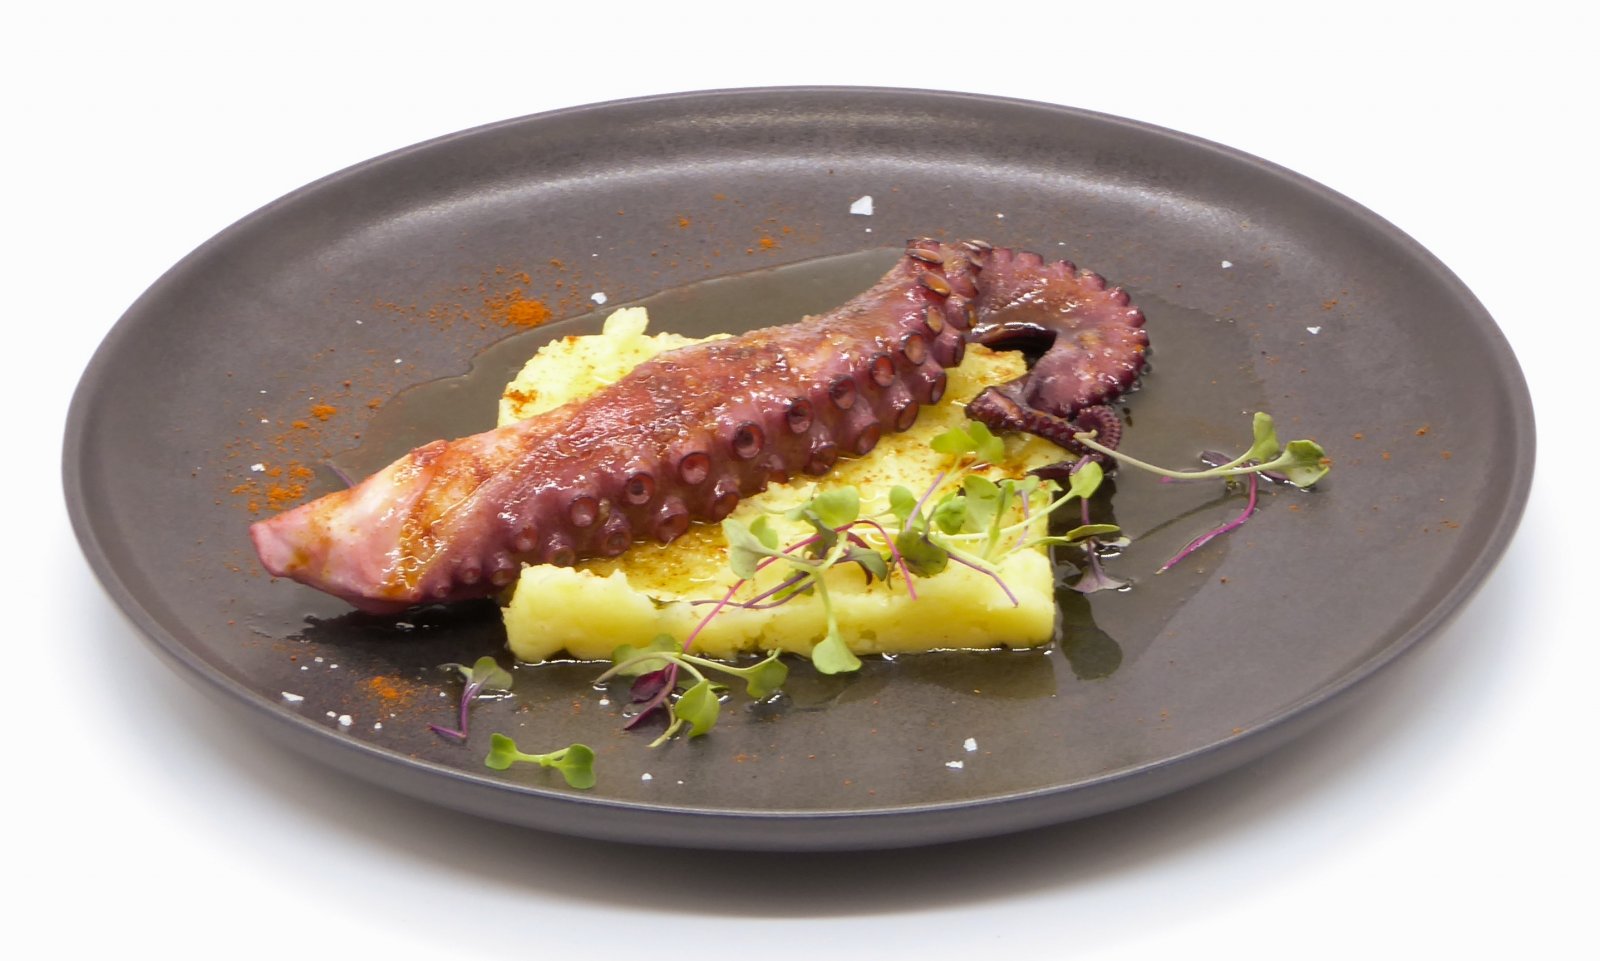 Pan fried octopus on a bed of mashed sweet potato and "Pimentón de La Vera" (Paprika)
